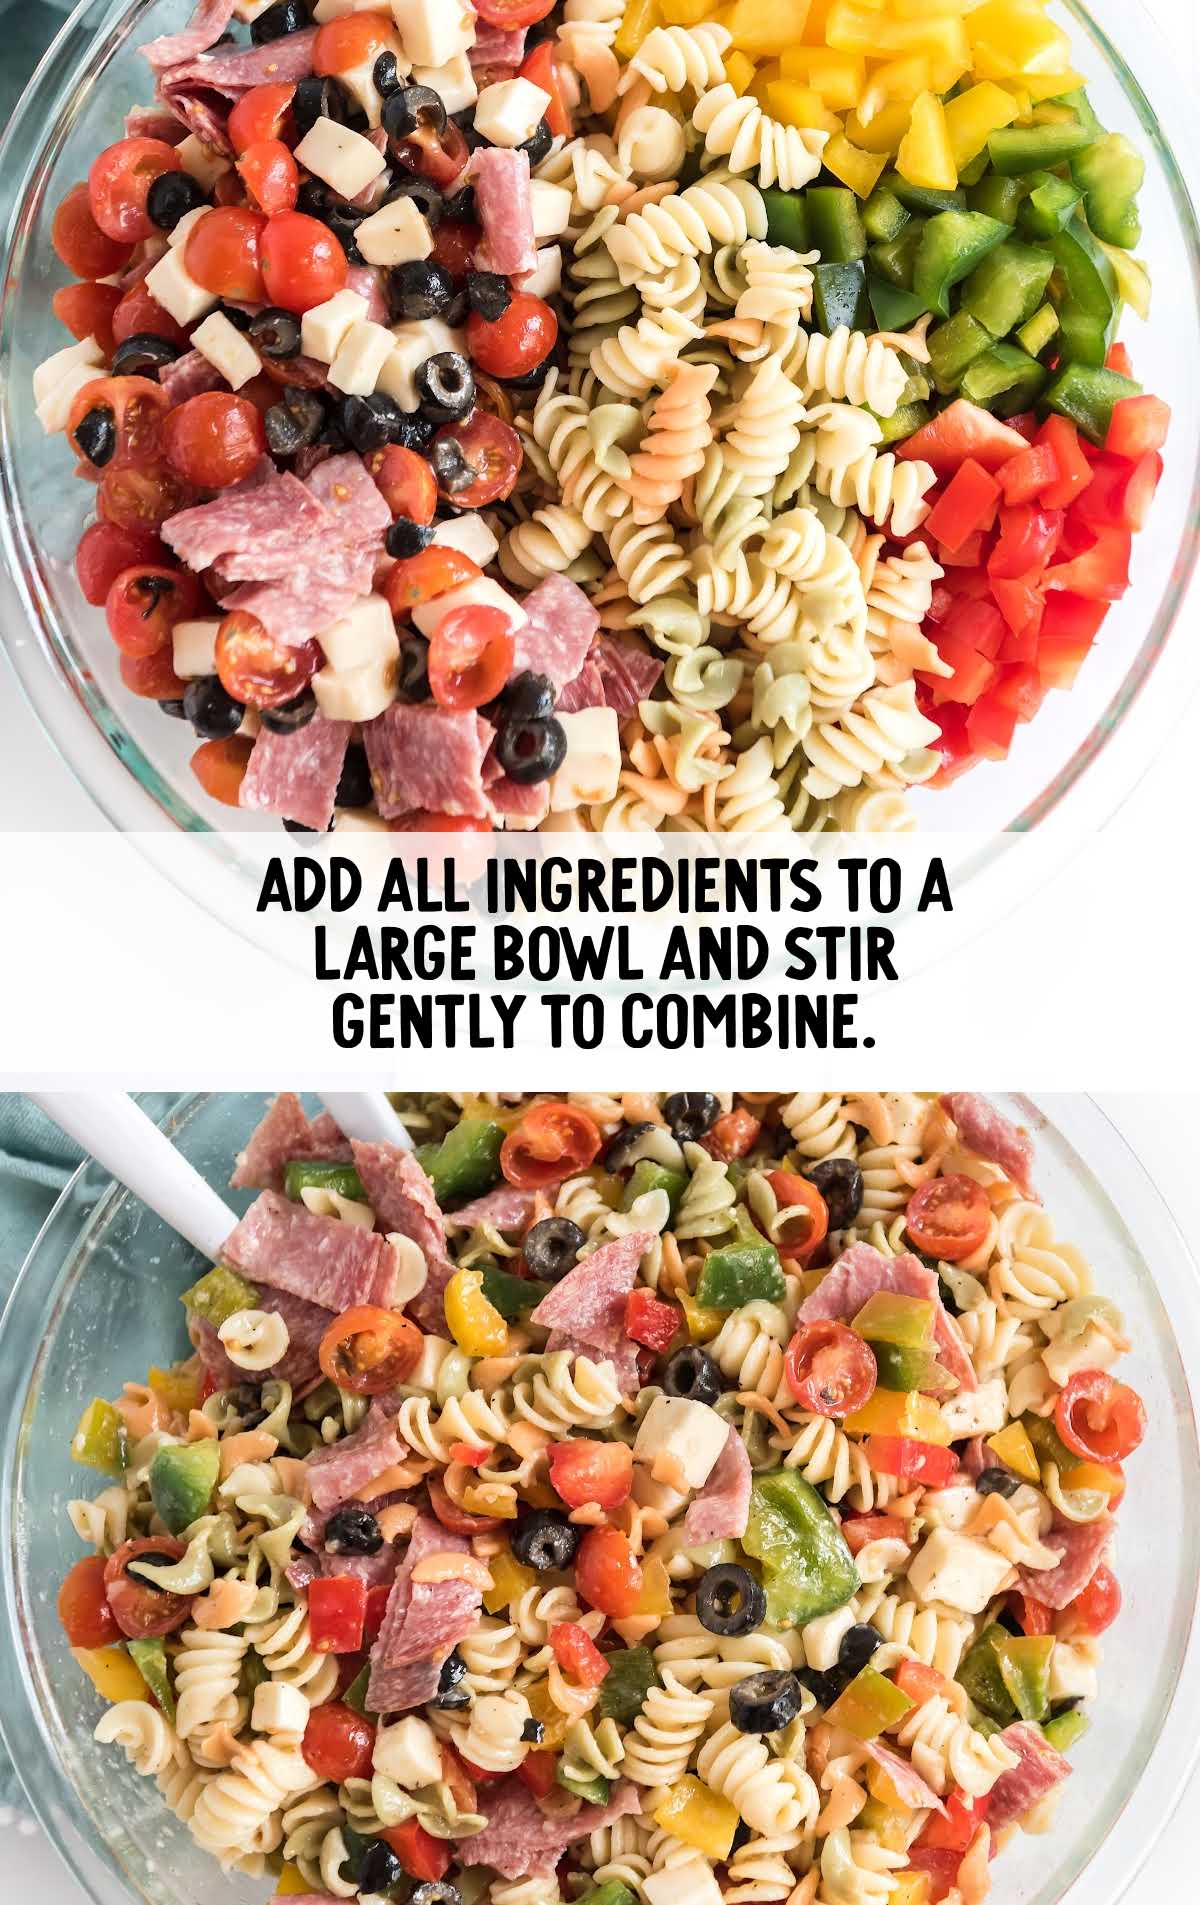 Salad ingredients combined in a large bowl